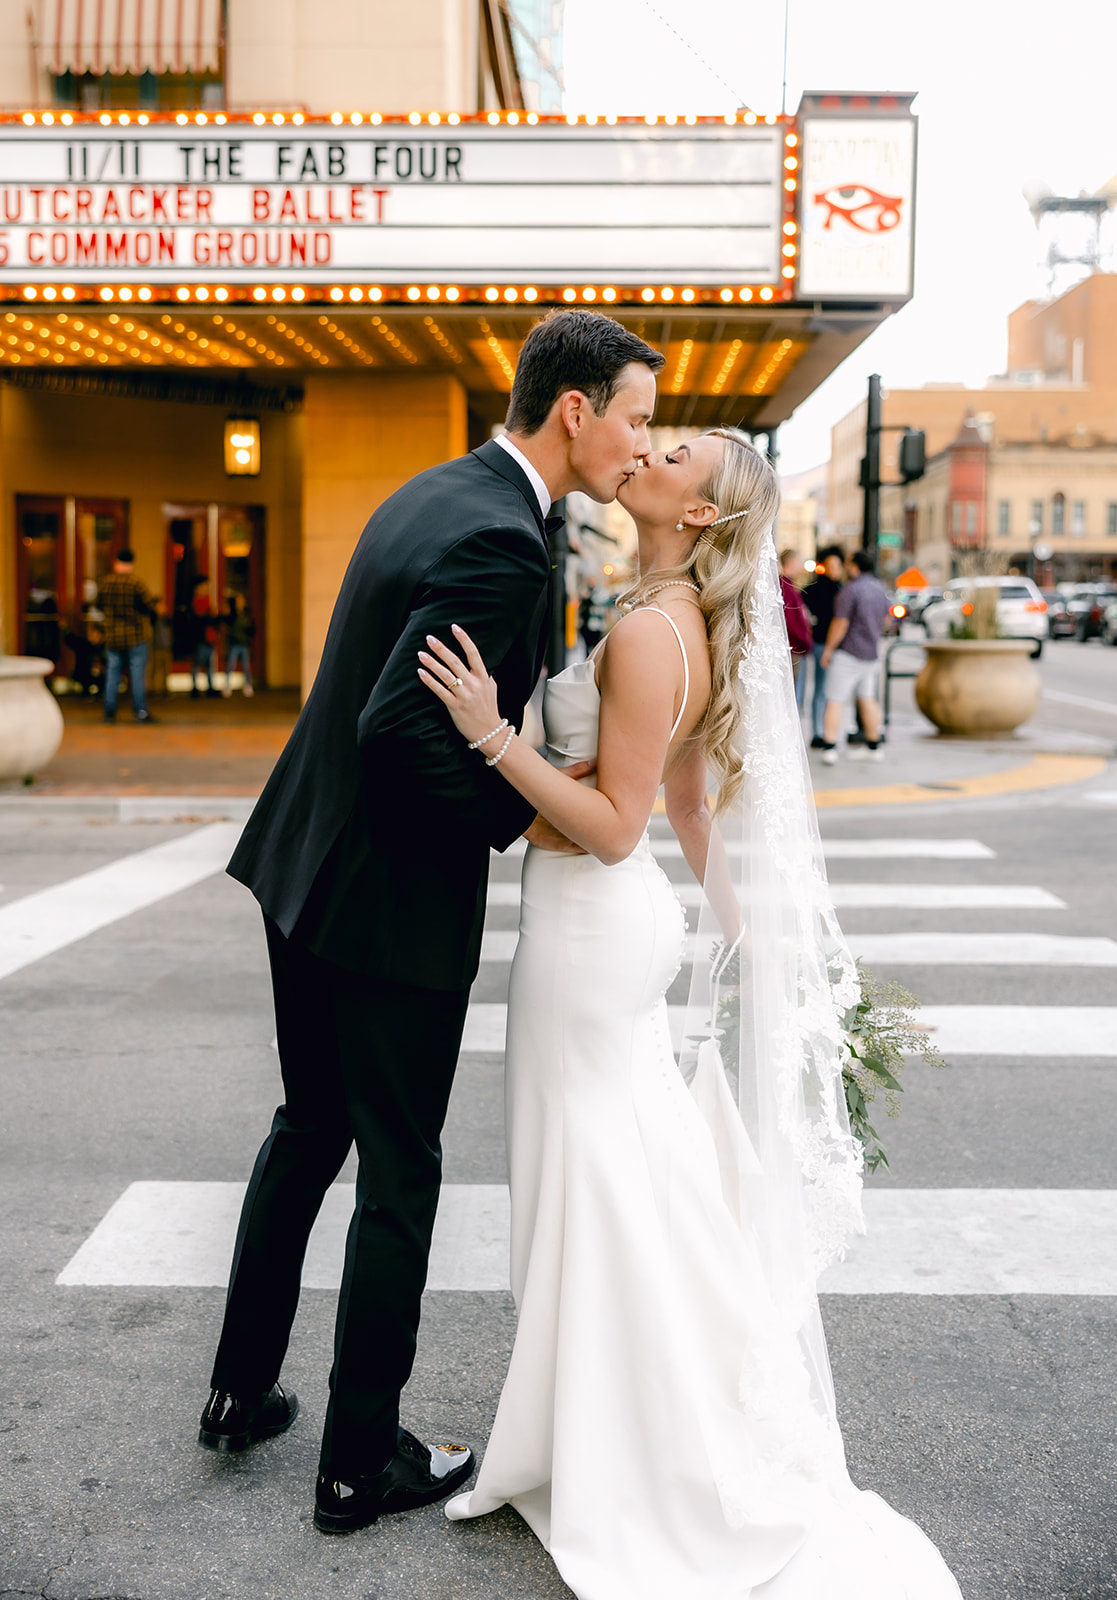 Old Hollywood Wedding at The Grove Hotel in Idaho